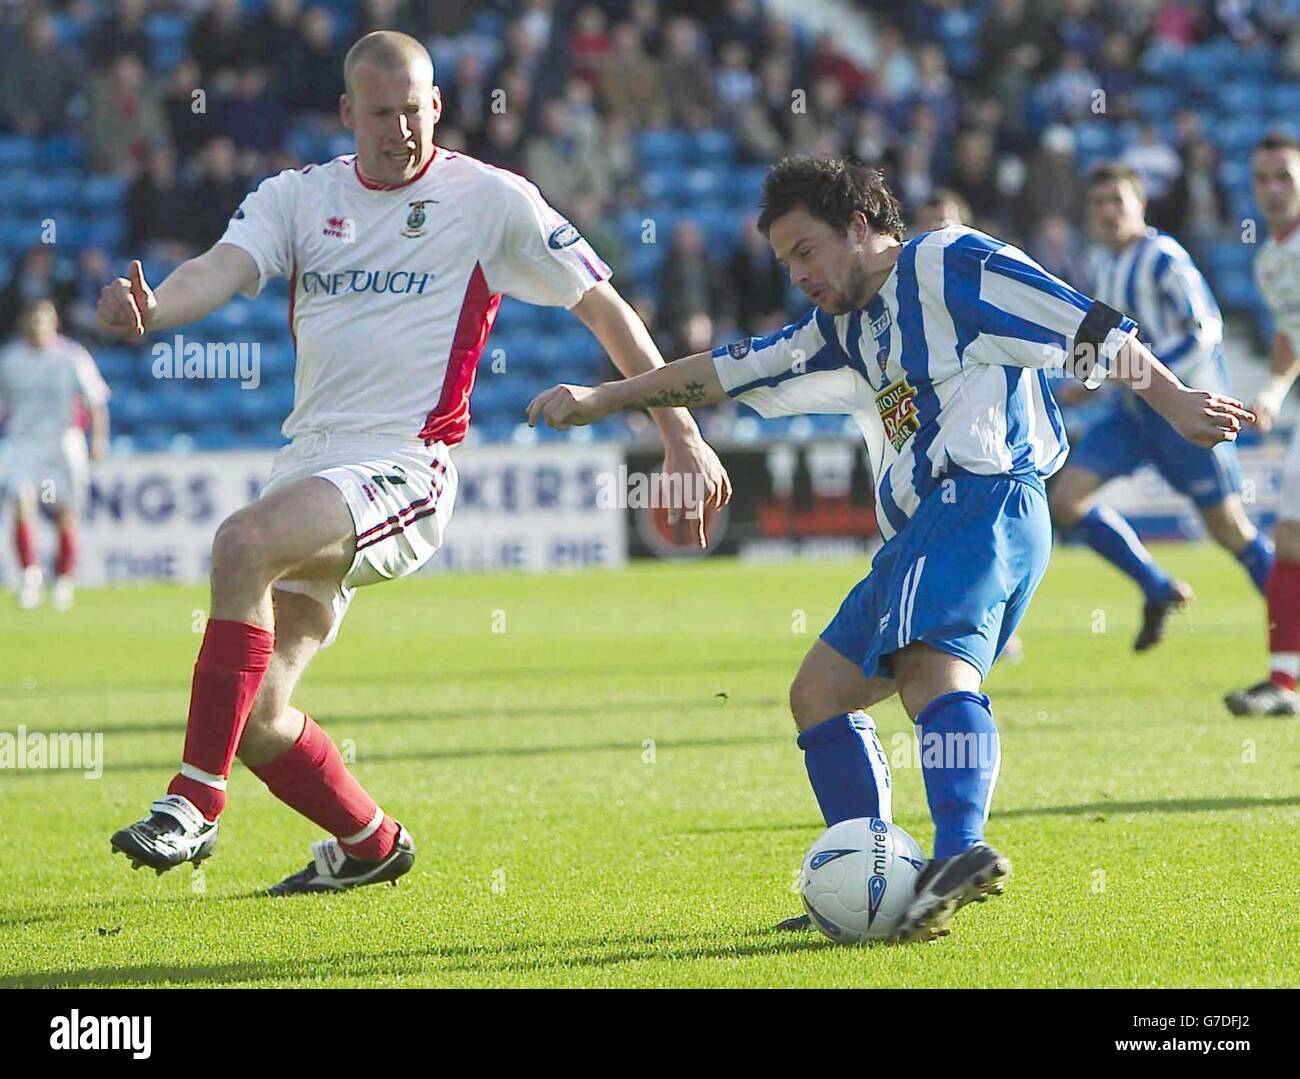 Kilmarnock's Stephen Murray opens the scoring past Inverness CT's Ross Tokley, during the Bank of Scotland Premier League match at the Rugby Ground, Kilmarnock, Saturday October 23, 2004. . Stock Photo